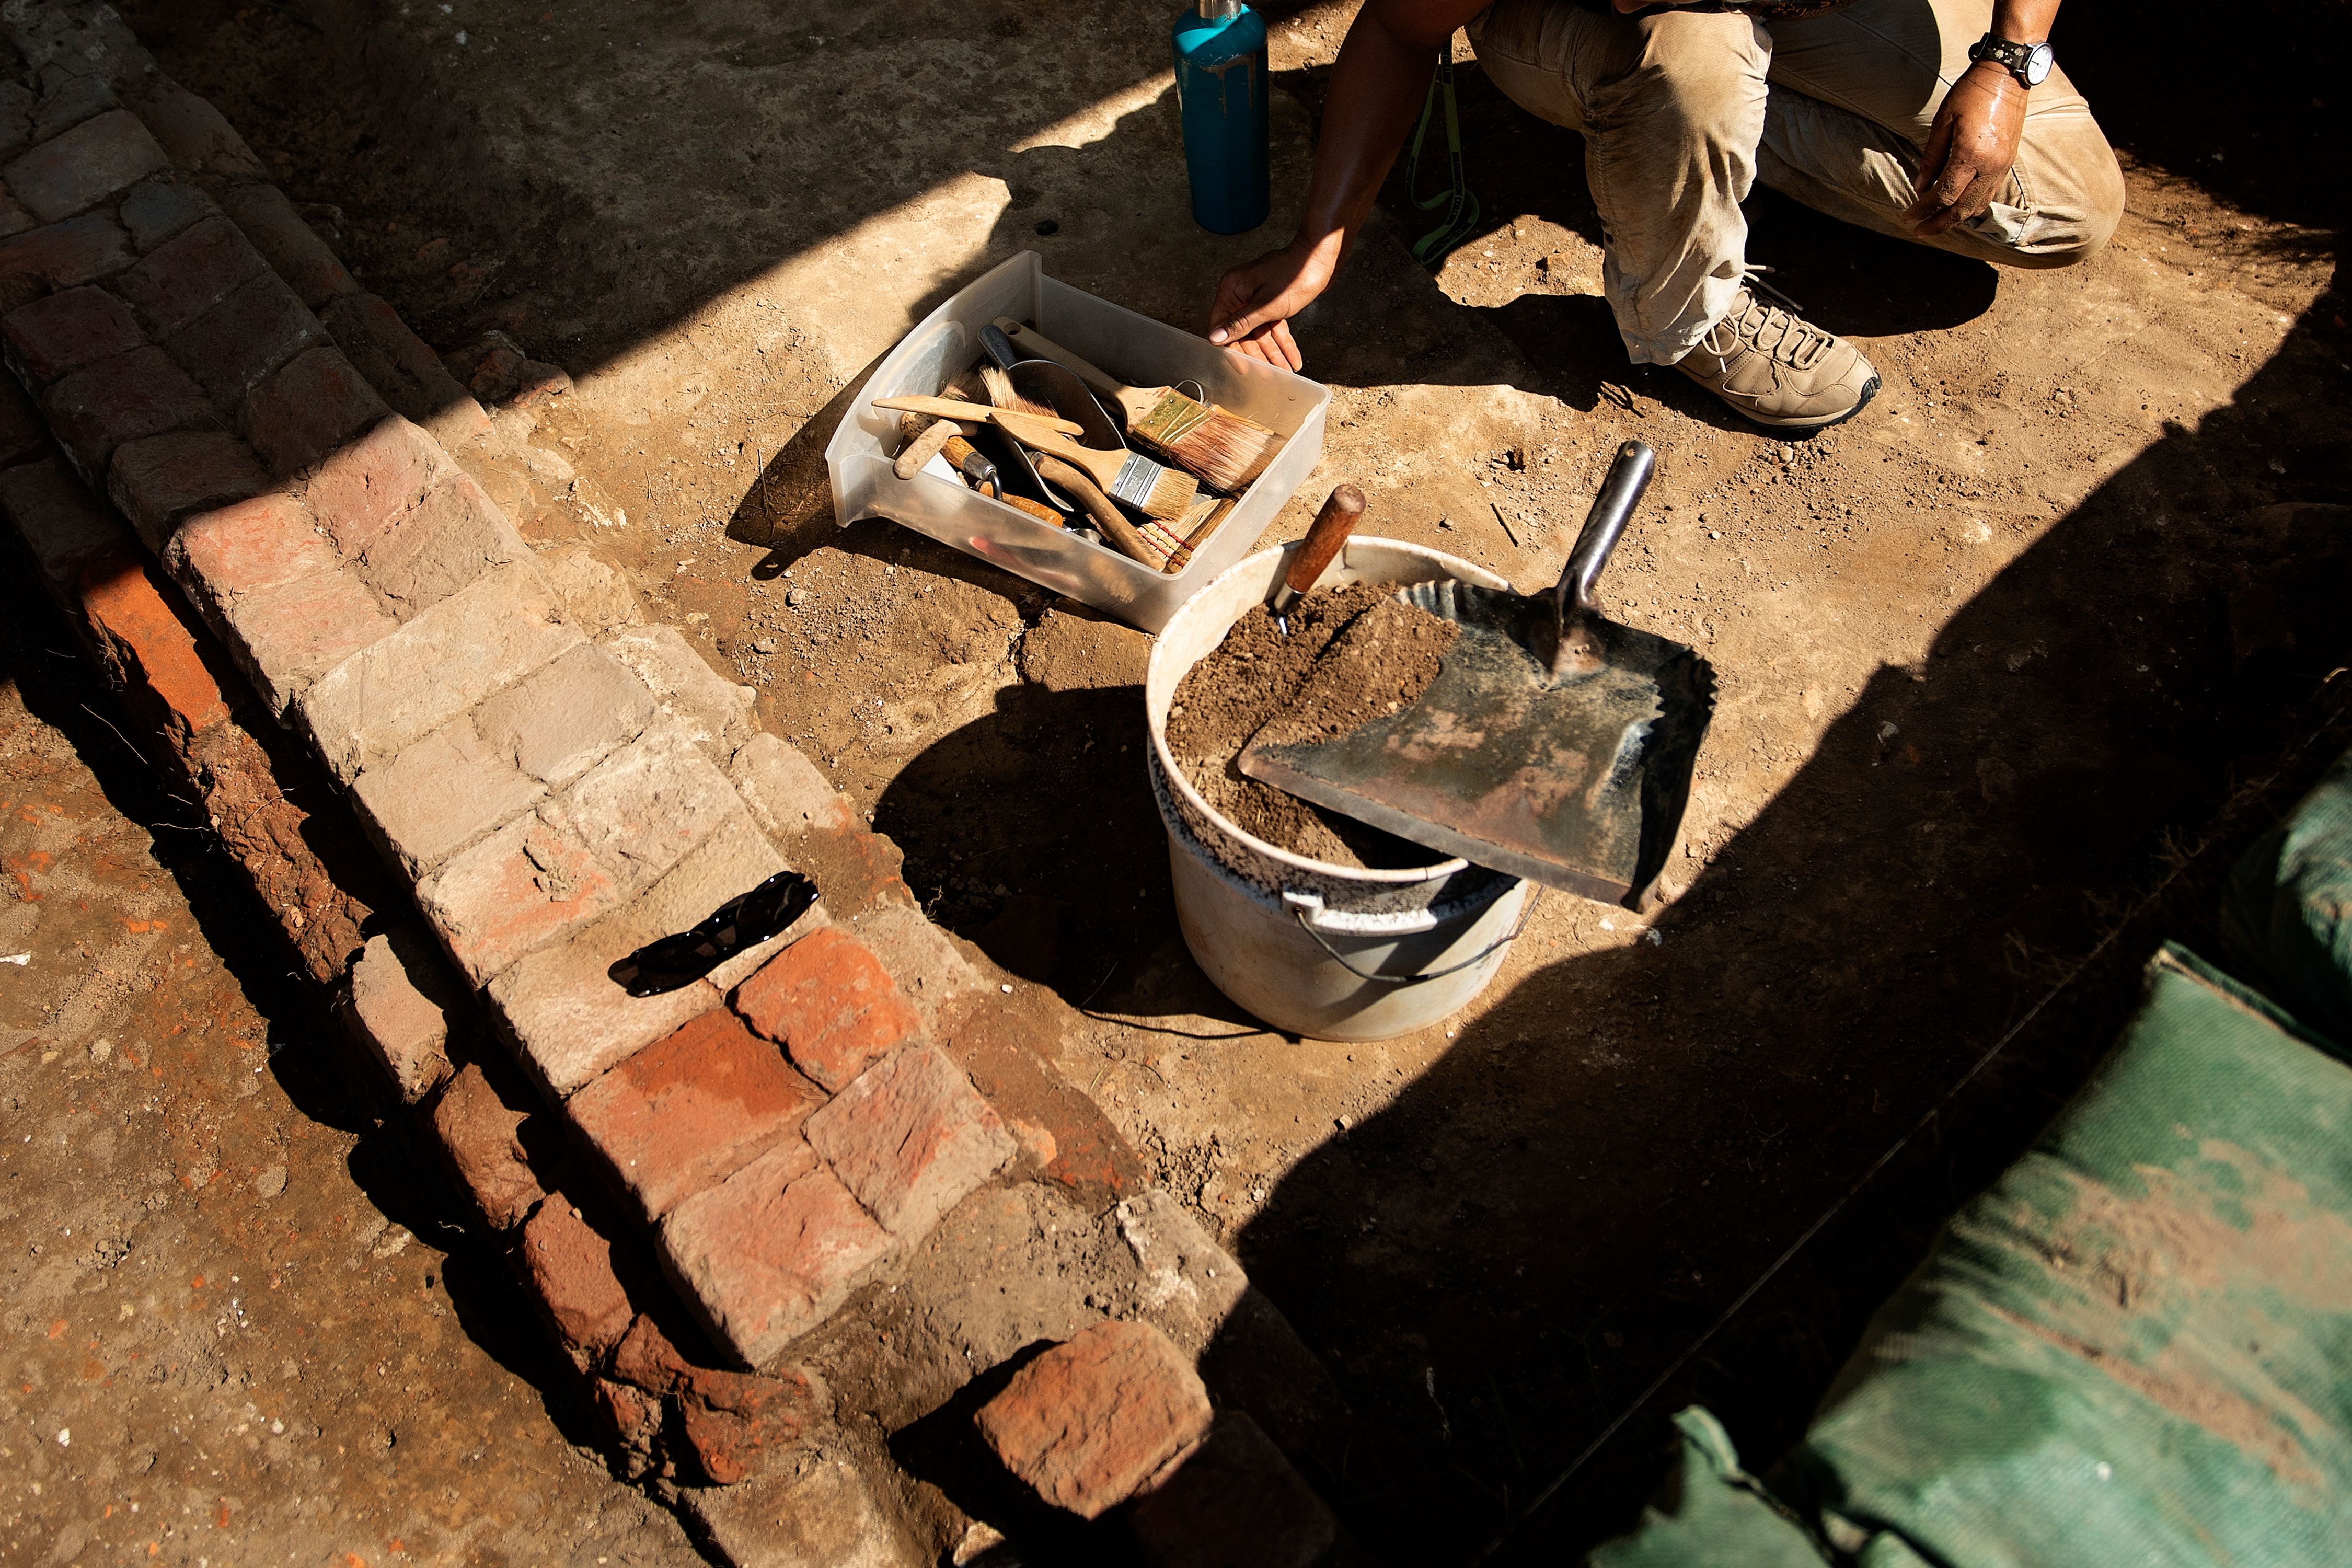 The dig is taking place in Colonial Williamsburg, which was the capital of Virginia from 1699 to 1780